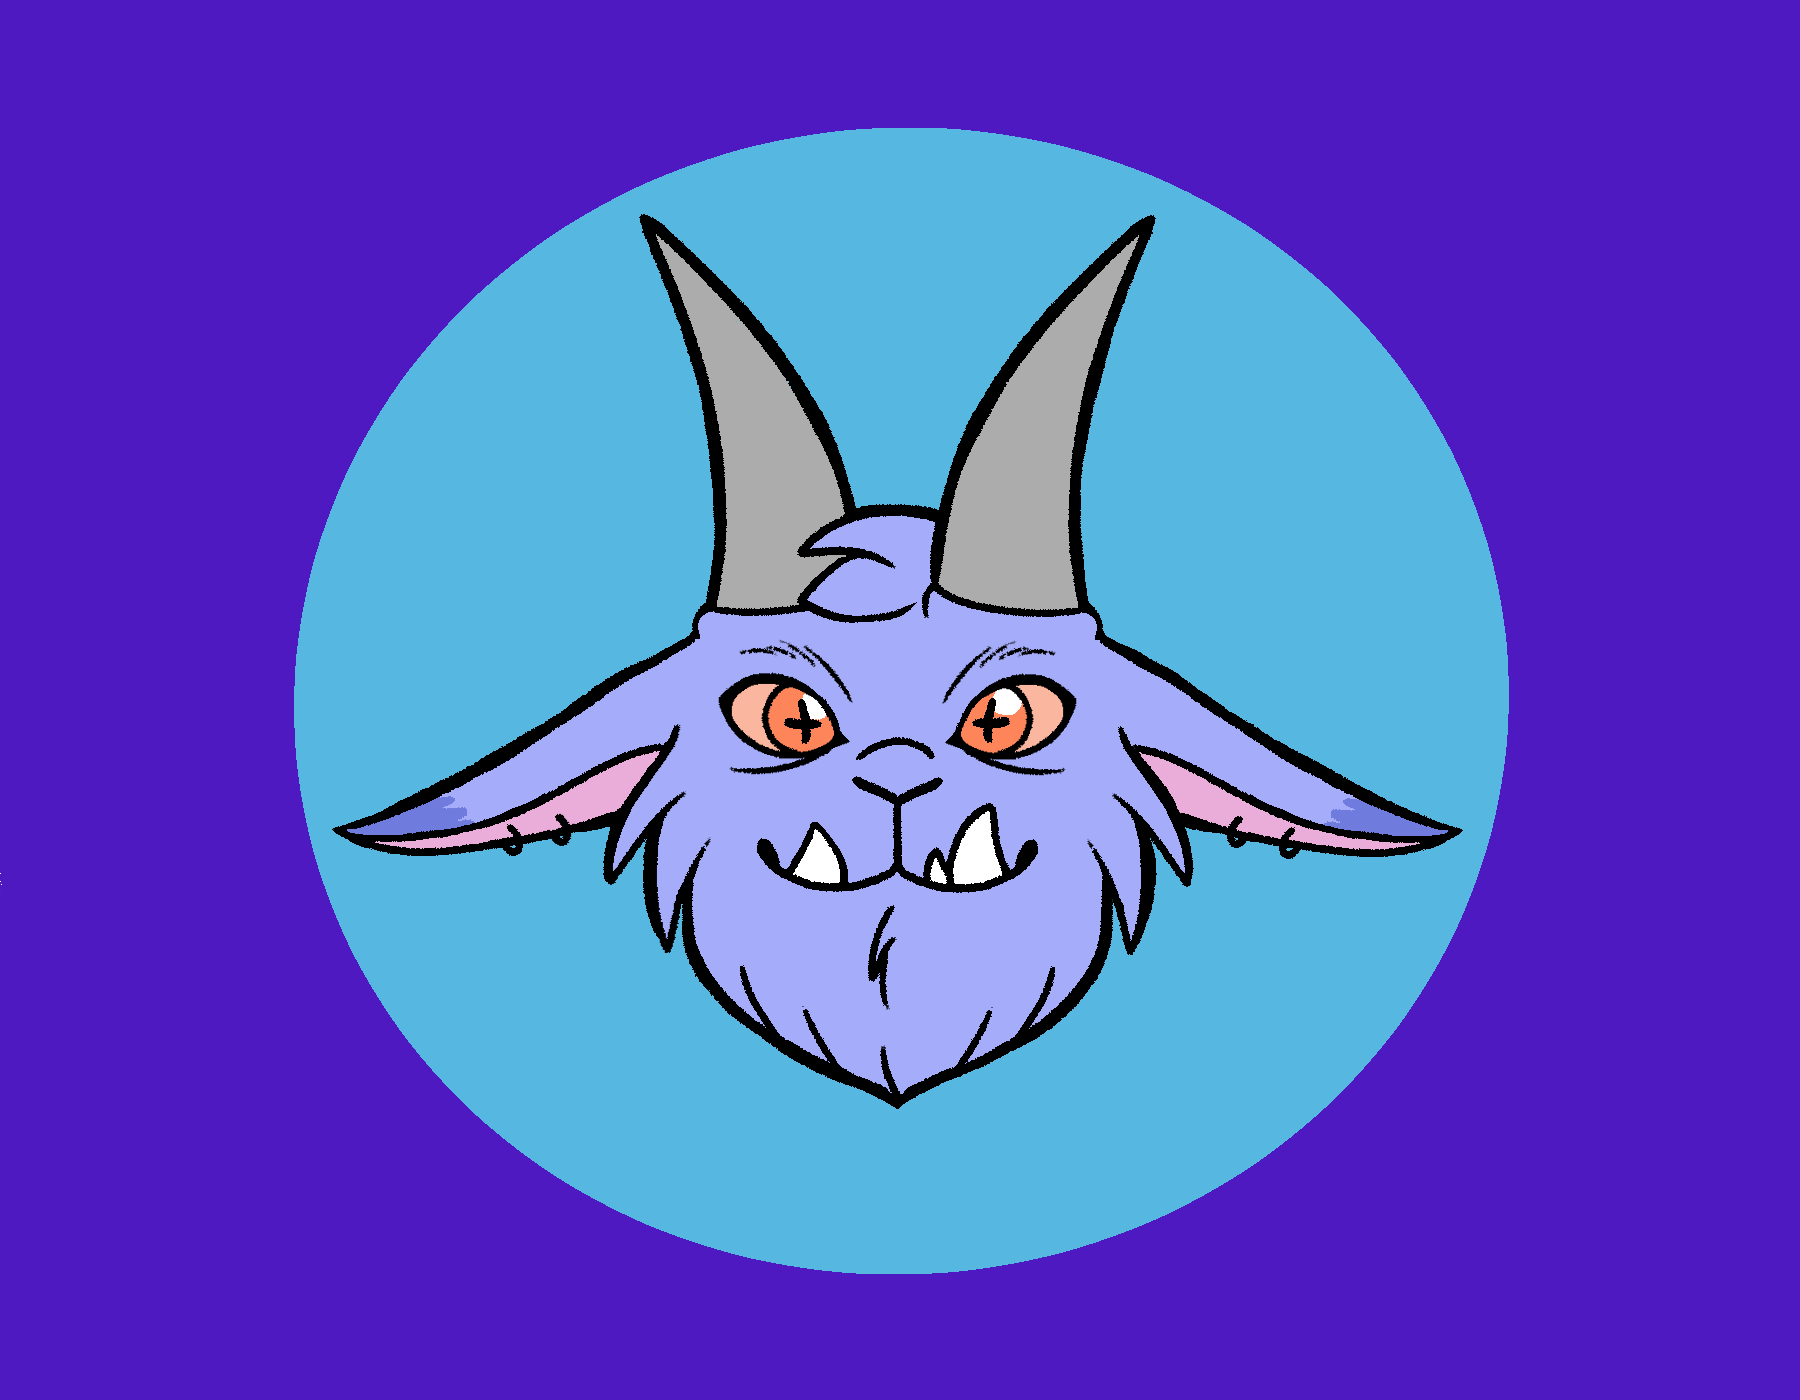 A digital drawing featuring the symmetrical face of Bentley Beast, Cartoon Creature Lover's lavender, goat-like, monster mascot.